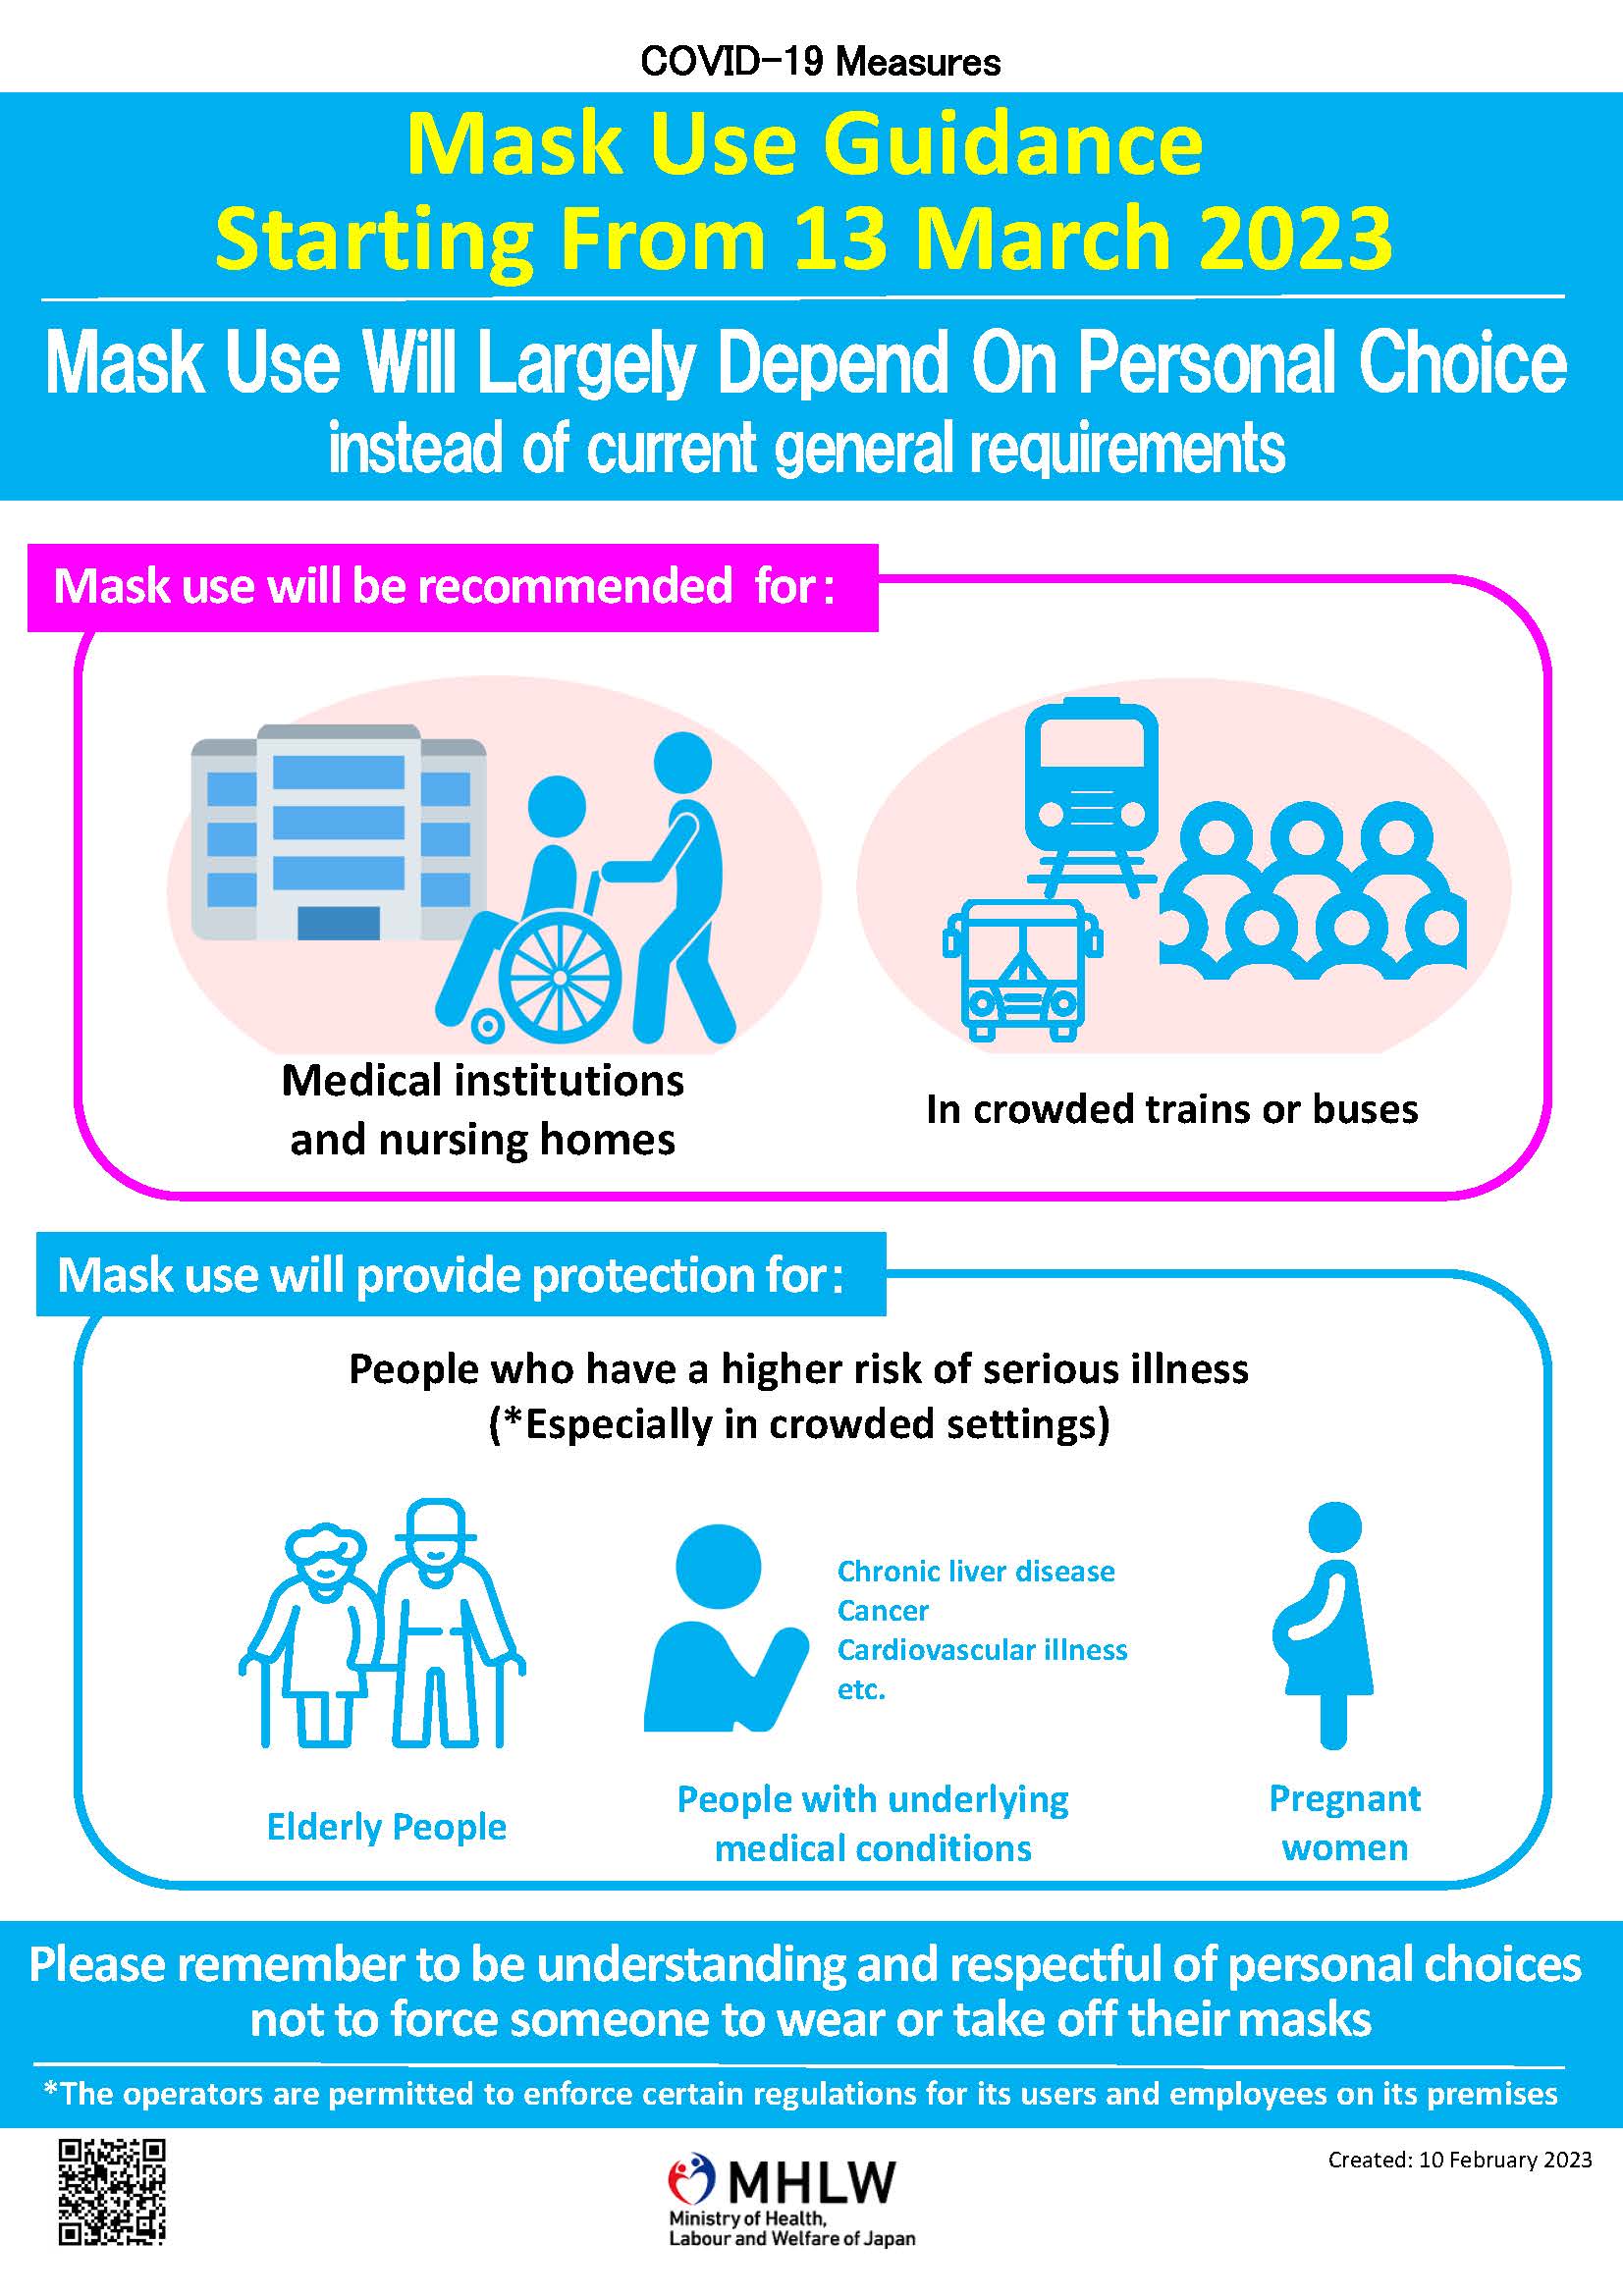 Mask Use Guidance Starting From 13 March 2023